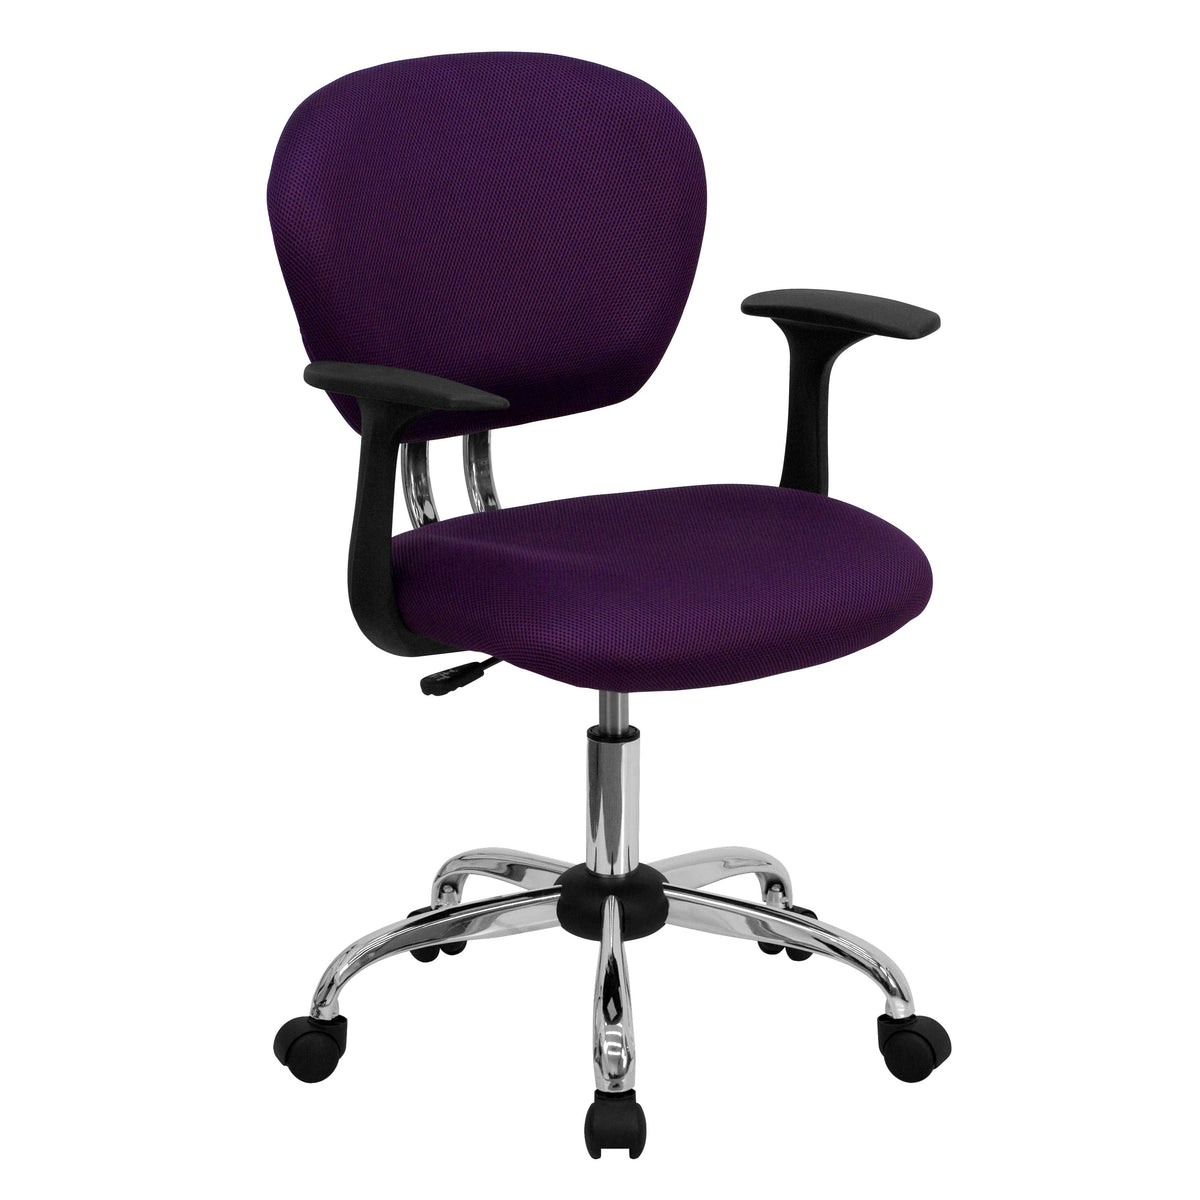 Purple |#| Mid-Back Purple Mesh Padded Swivel Task Office Chair with Chrome Base and Arms